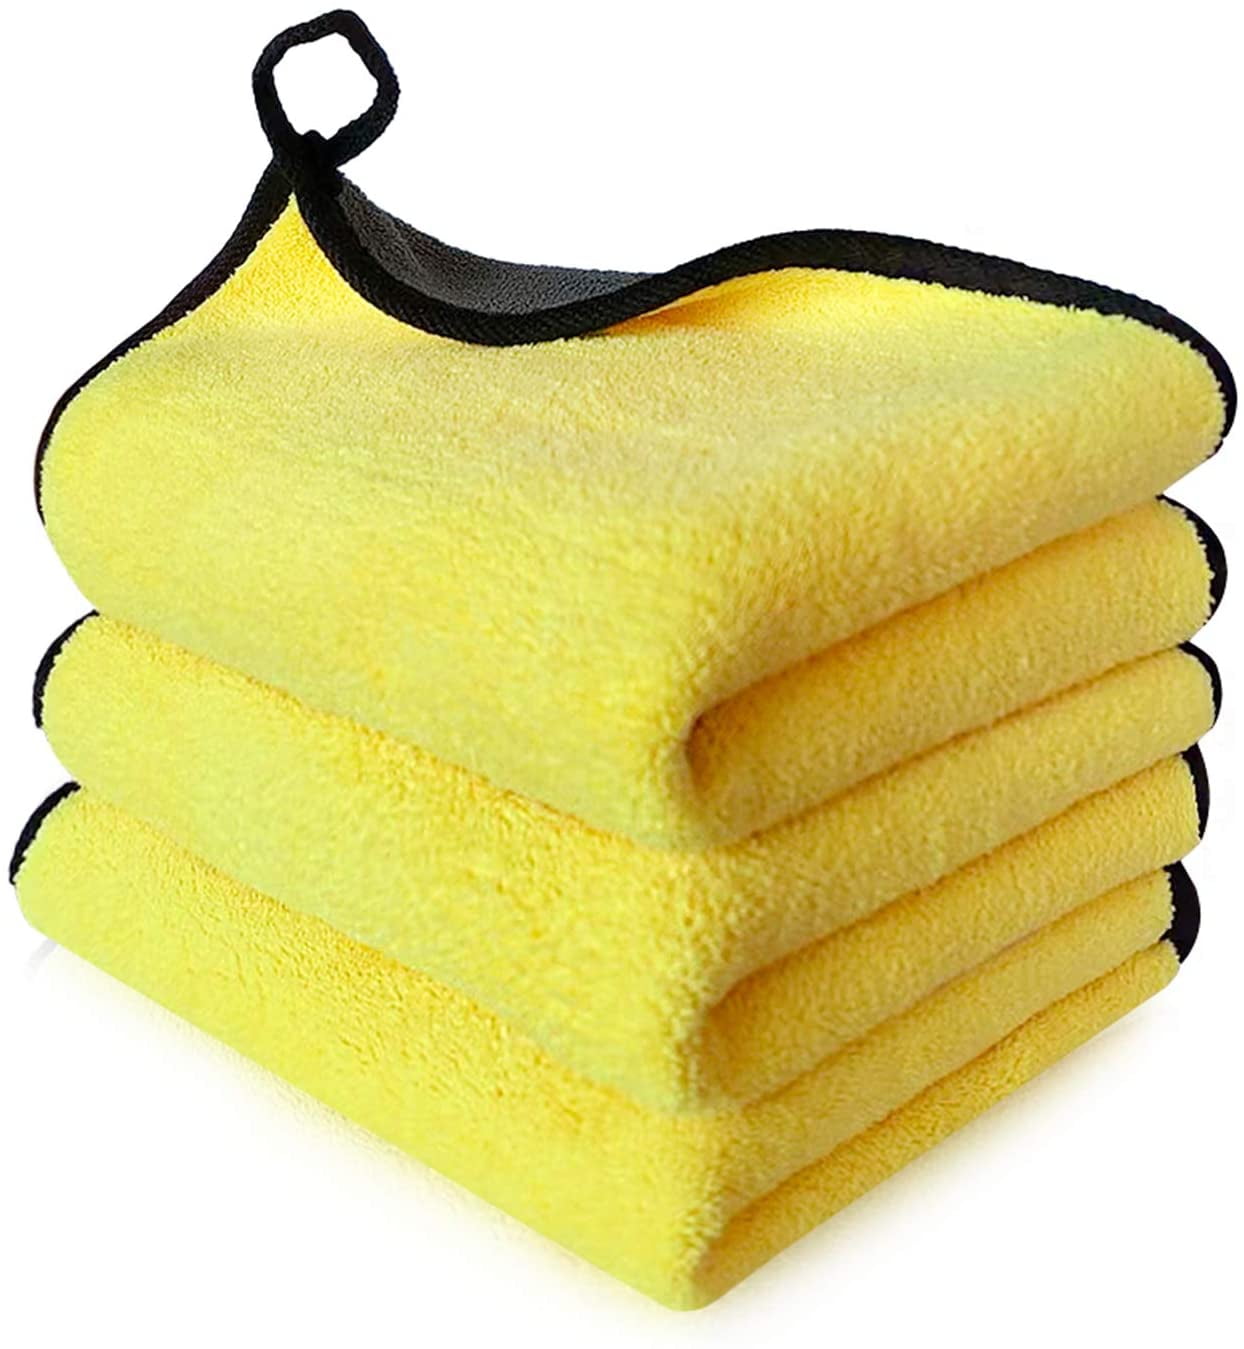 4 NANO Technology Super ultra microfiber cloth,Best absorbent Double Face 